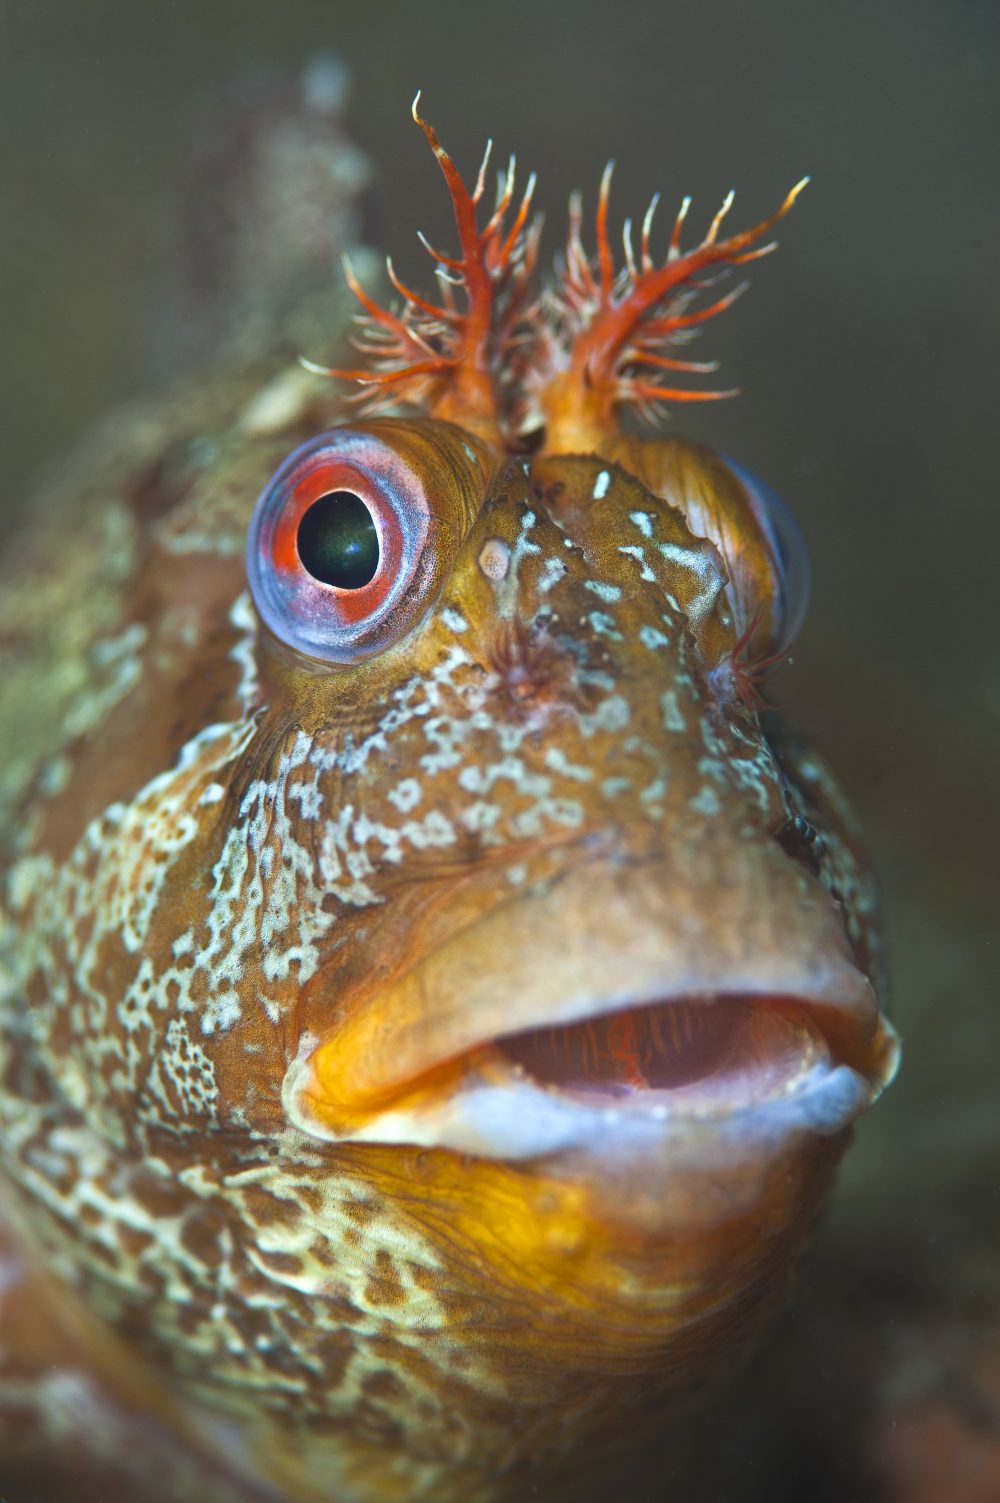 A portrait of a tompot blenny (Parablennius gattorugine) beneath Swanage Pier, Dorset, UK. Photographed during August, when the blennies have their strongest colouration - Photo by Alexander Mustard